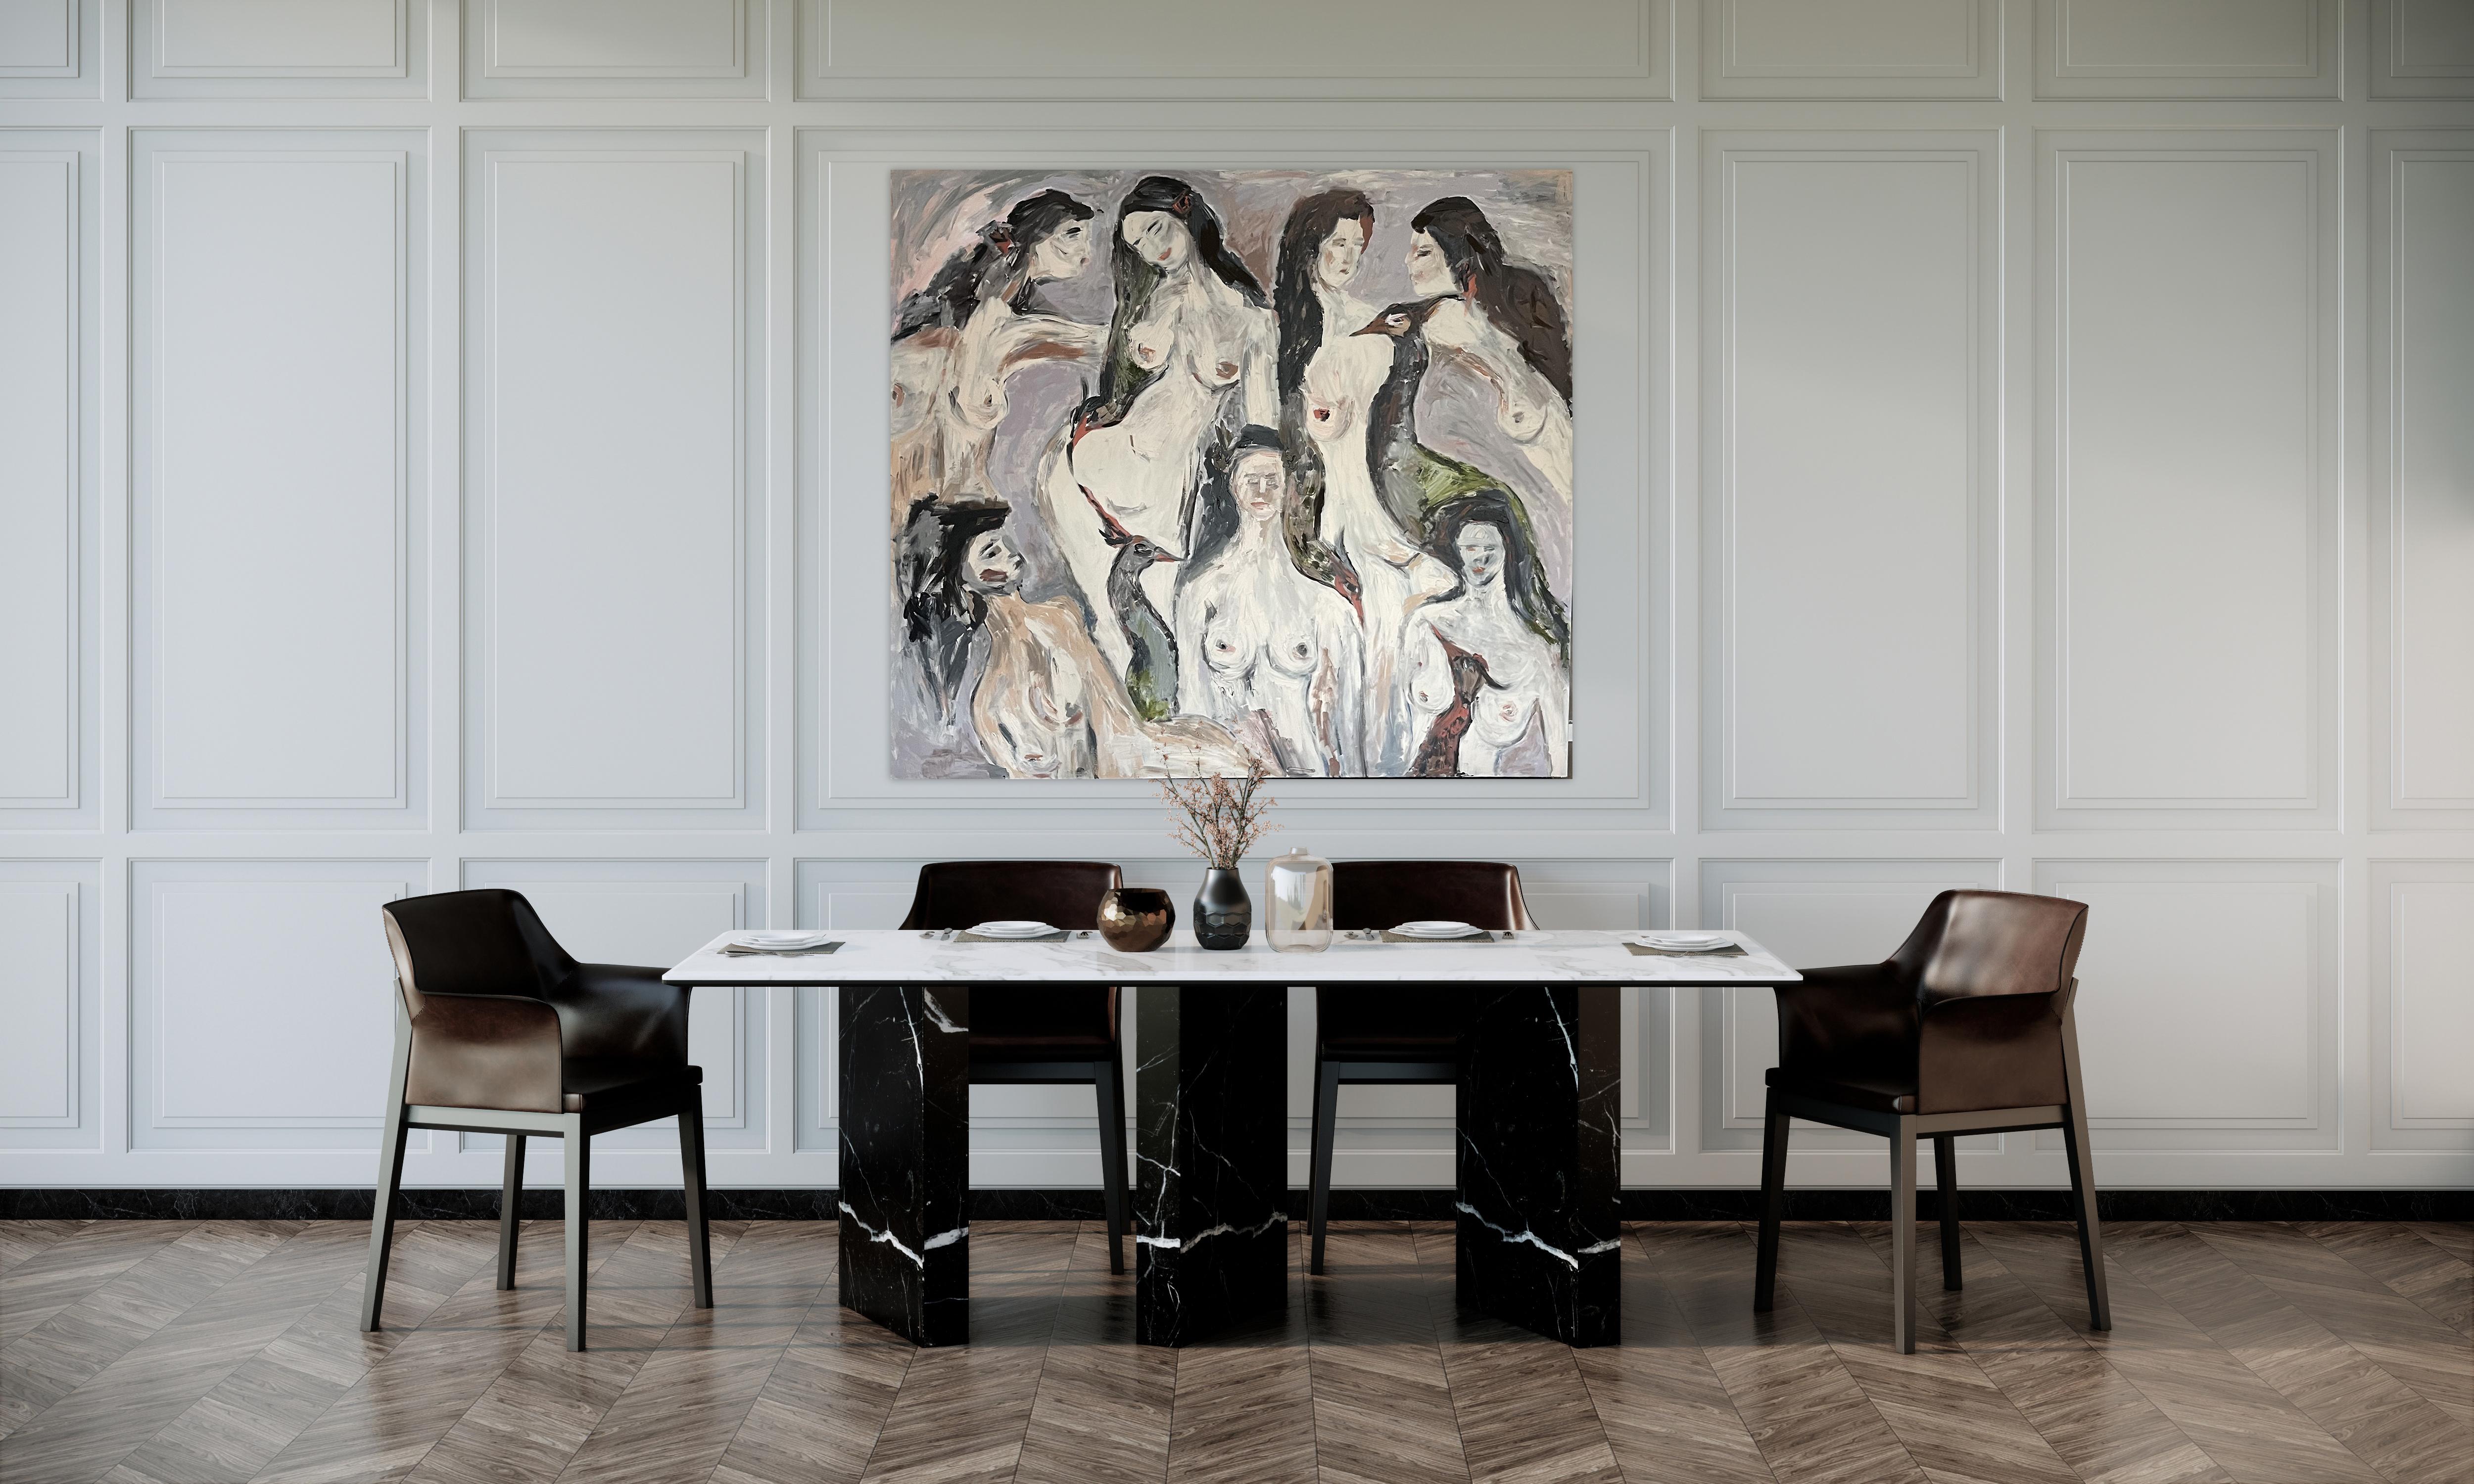 Title: «Orgia número 7»  

Collection: Muses

Description: Acrylic on canvas, figurative, dark, love, gestural, modern

Symbolism of the number 7: love. This image tells us an erotic story about goddesses who embark on a soft and passionate orgy.